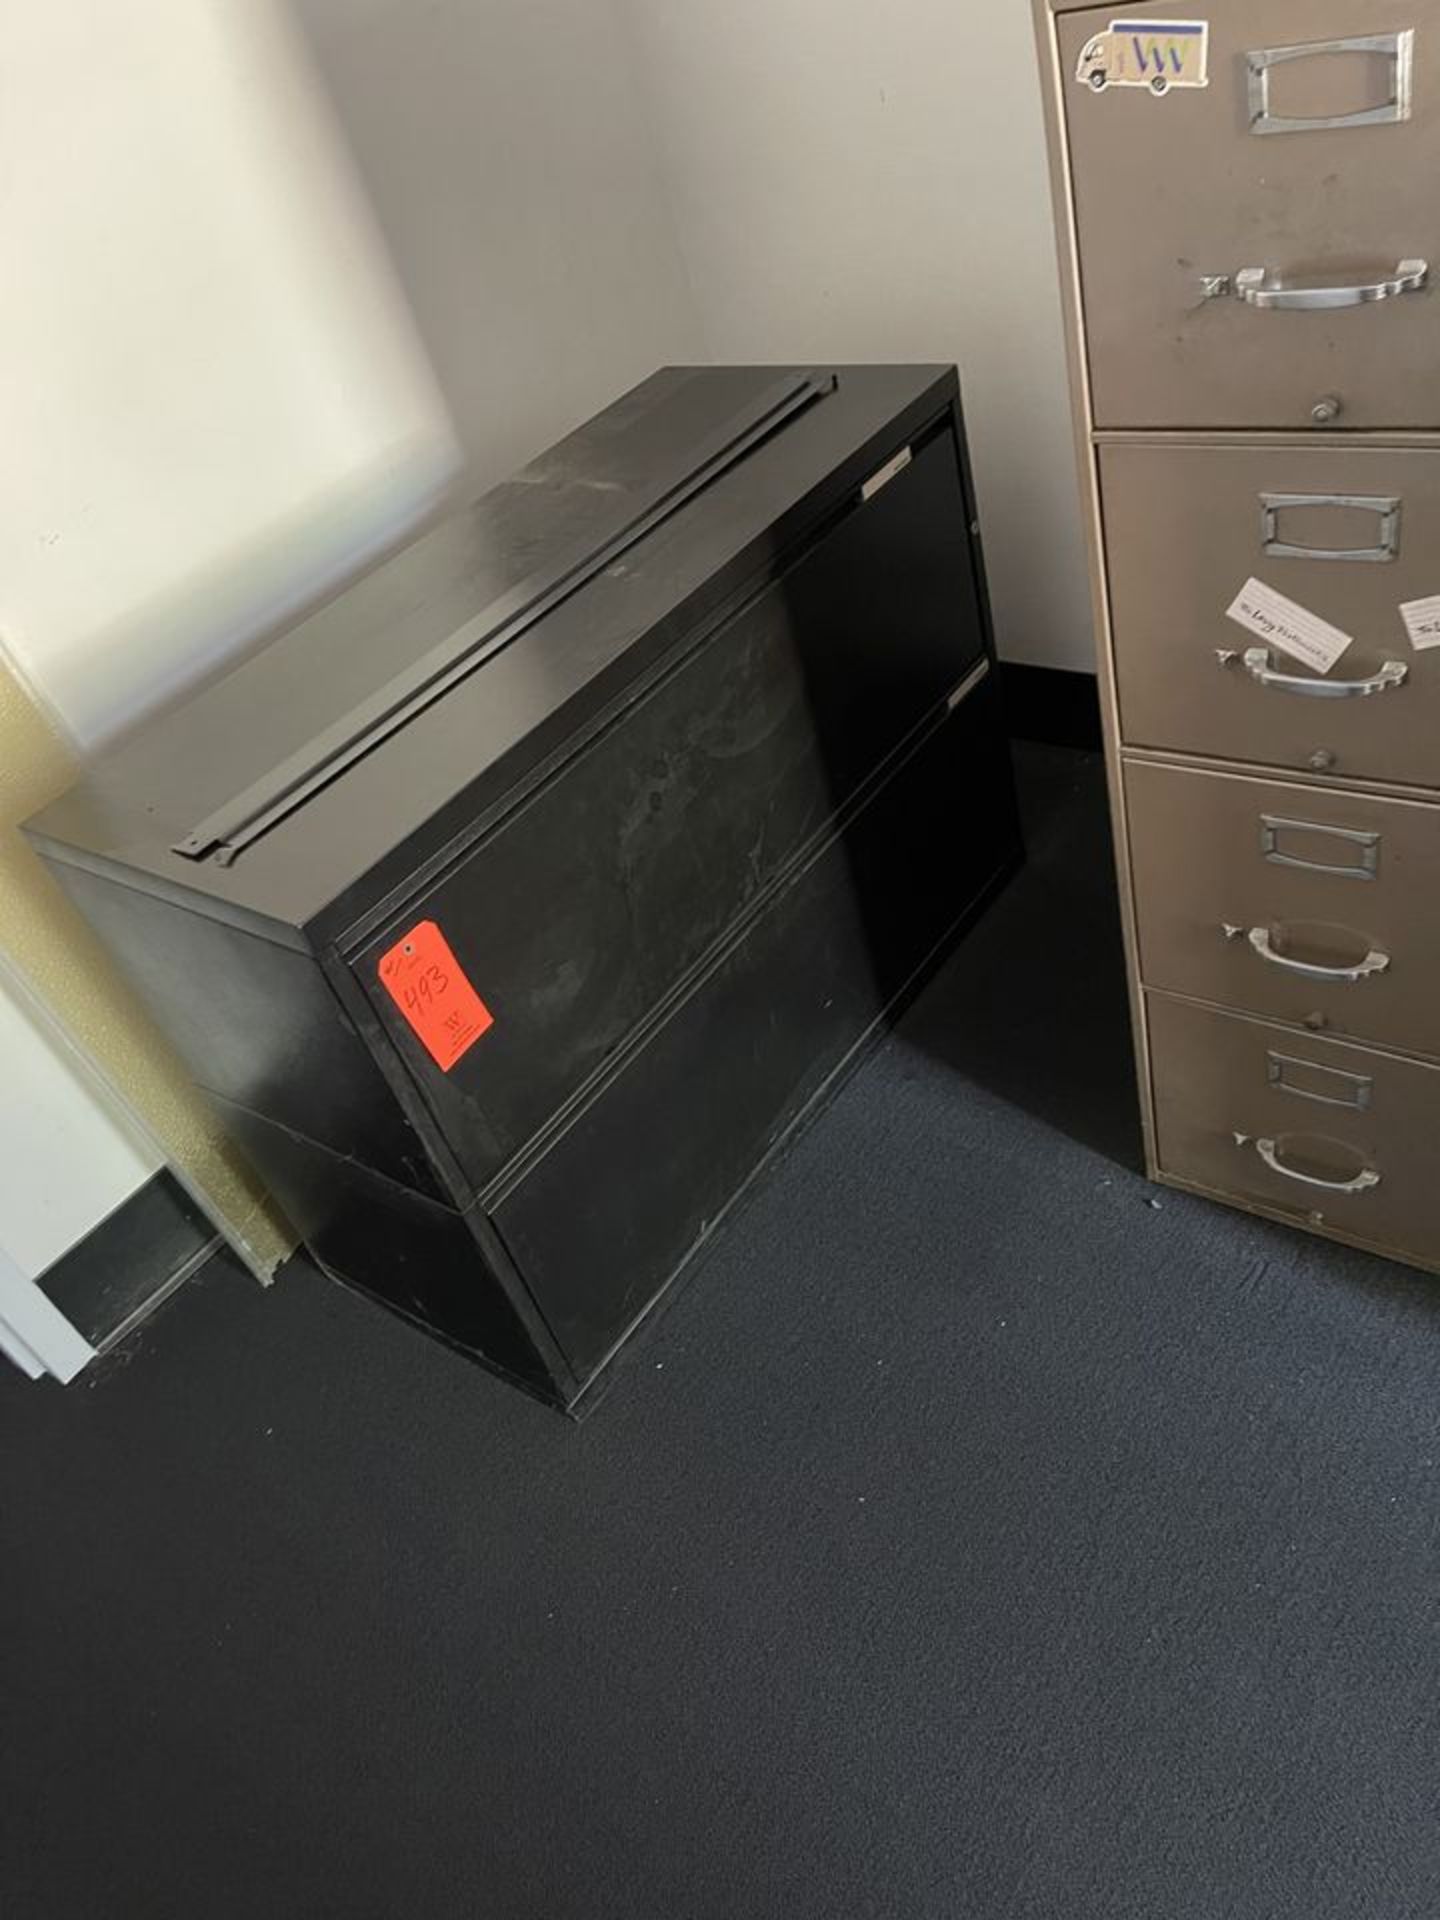 Lot - (4) File Cabinets: (1) 5-Drawer, (1) 3-Drawer, (1) 2-Drawer Lateral and (1) 4-Drawer - Image 2 of 3